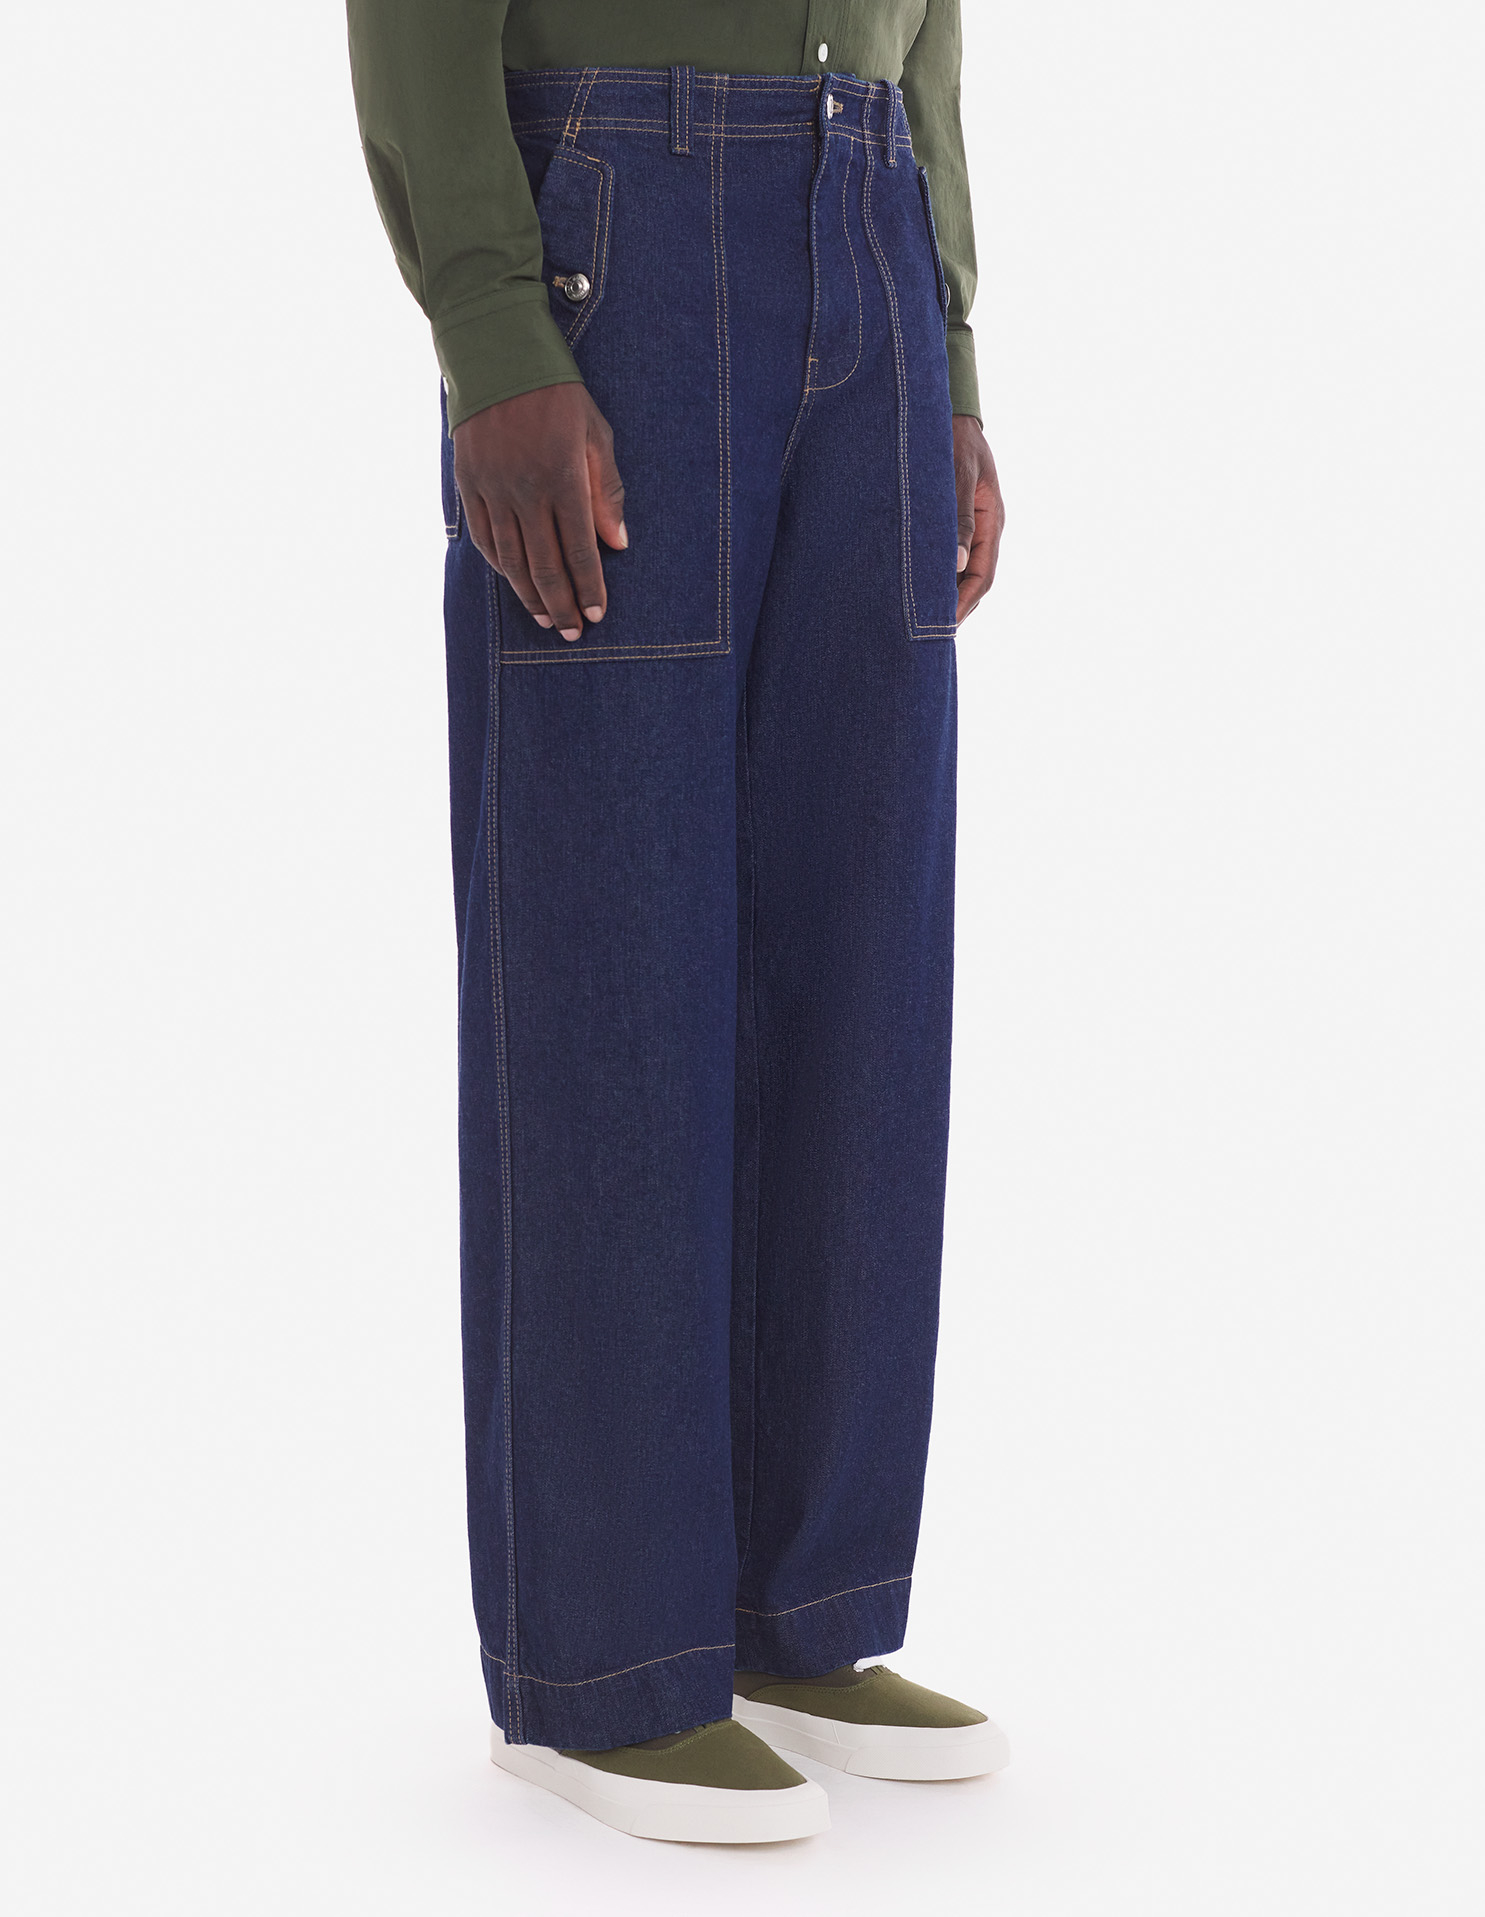 WORKWEAR PANTS IN WASHED DENIM WITH FOX HEAD PATCH | Maison Kitsuné